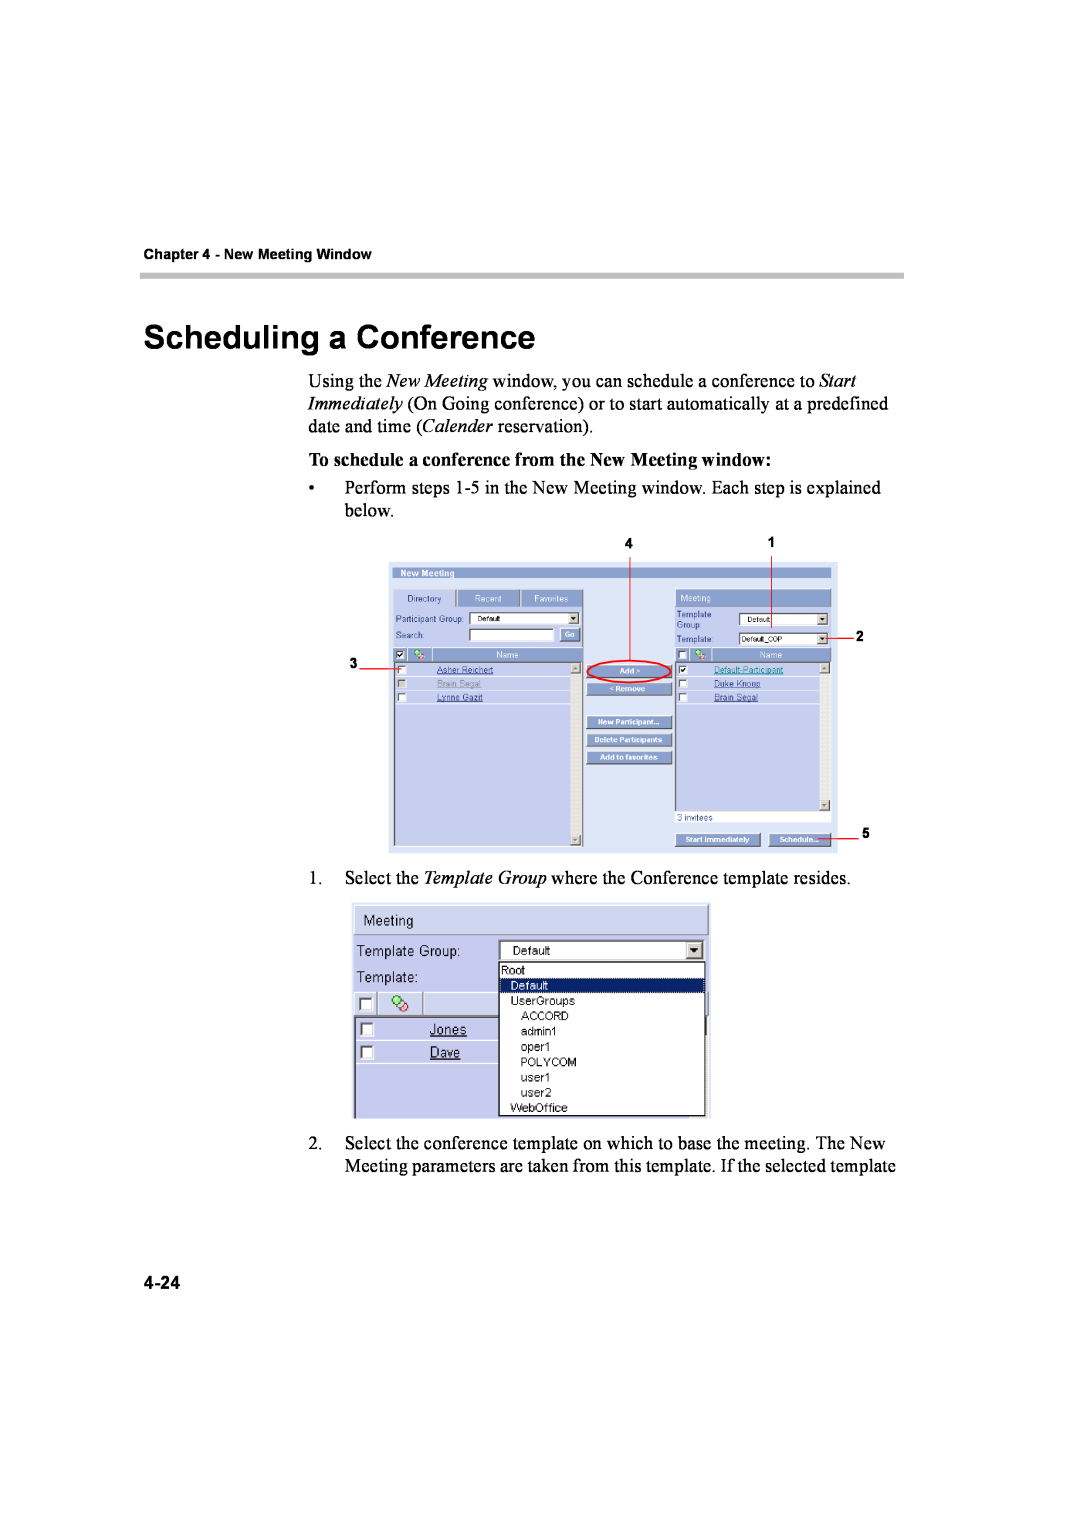 Polycom 8 manual Scheduling a Conference, New Meeting Window, 41 2 3 5 